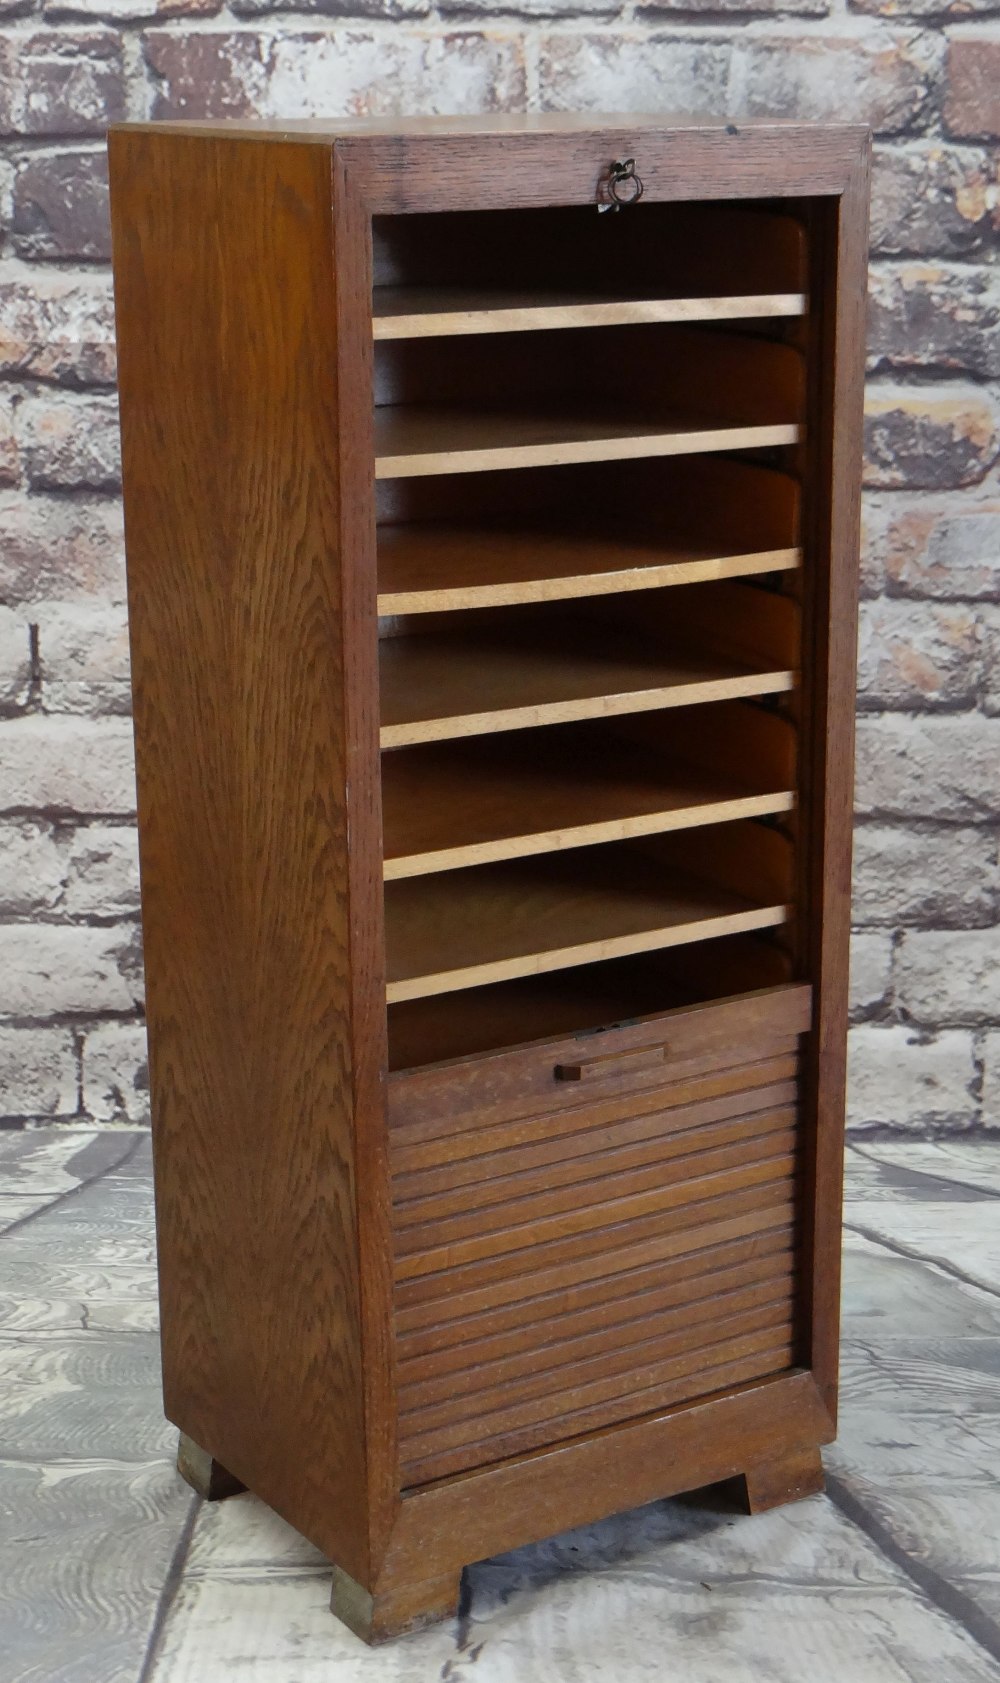 MID-CENTURY ELM TAMBOUR FRONT STATIONERY CABINET, fitted with 9 open faced drawers, key lock, 46.5 x